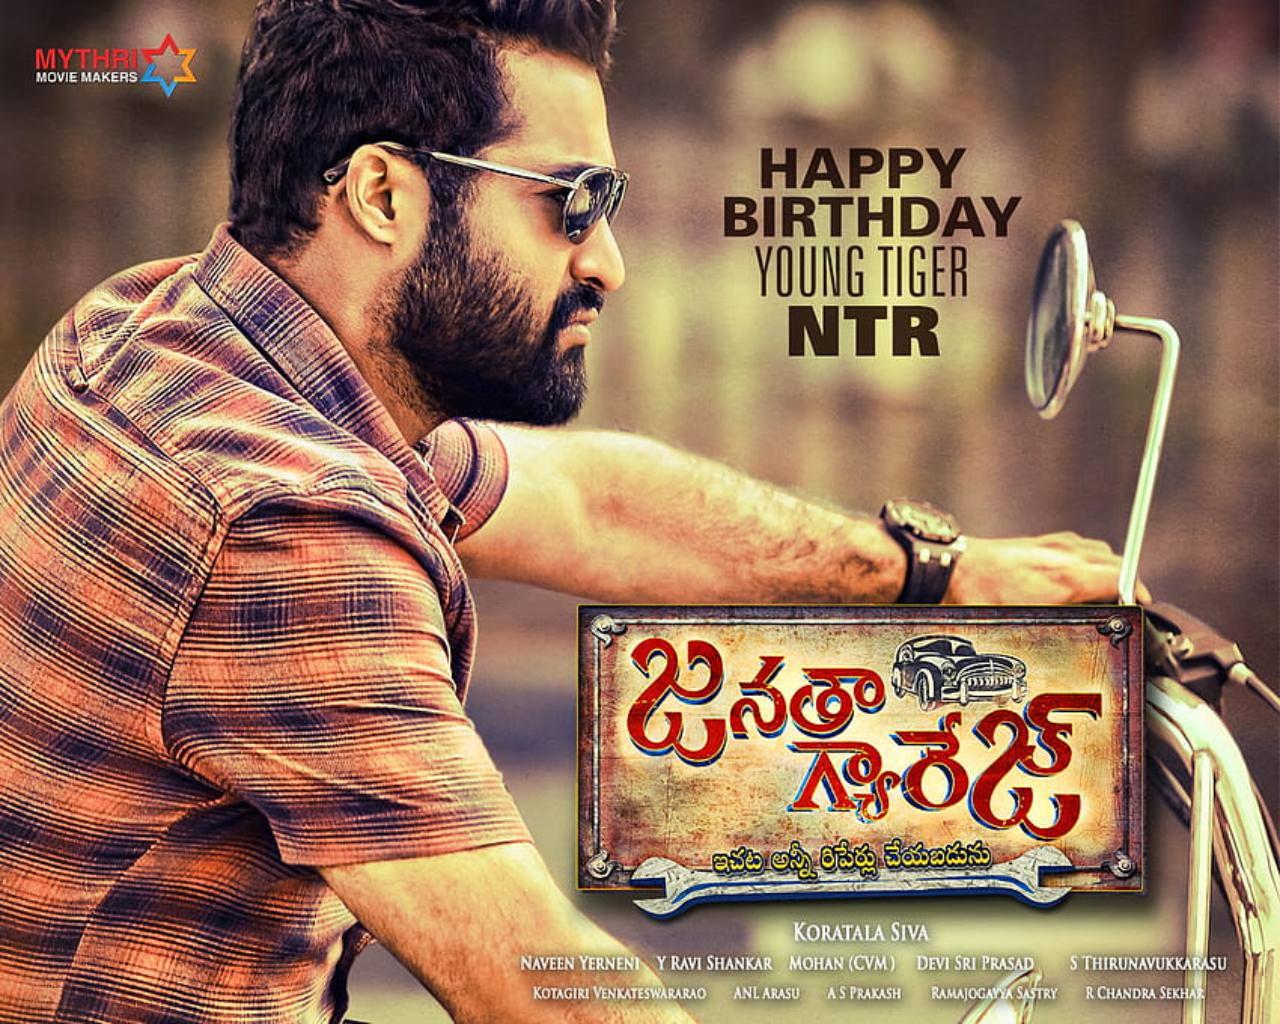 NTR's 'Janatha Garage' first look posters were unveiled to a thumping response. Stylish poster trended on social media. NTR Jr. sported rugged look on bike with new hairstyle and cool avatar in the second poster. Koratala Siva had designed a complete mass role for NTR in the film.
 